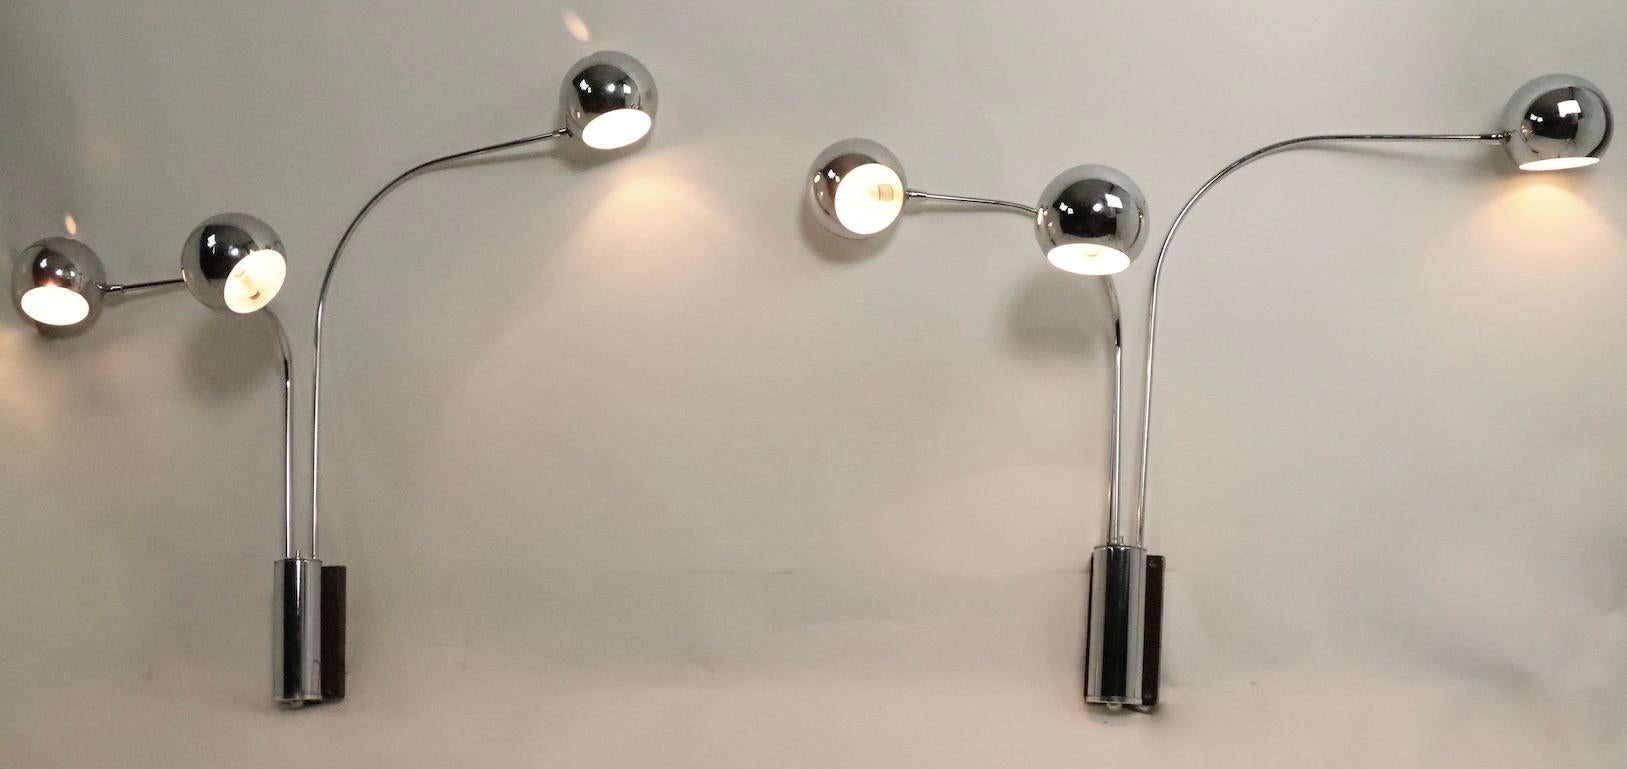 Pair of Mod Three-Arm Chrome Ball Sconces by Mutual Sunset For Sale 1